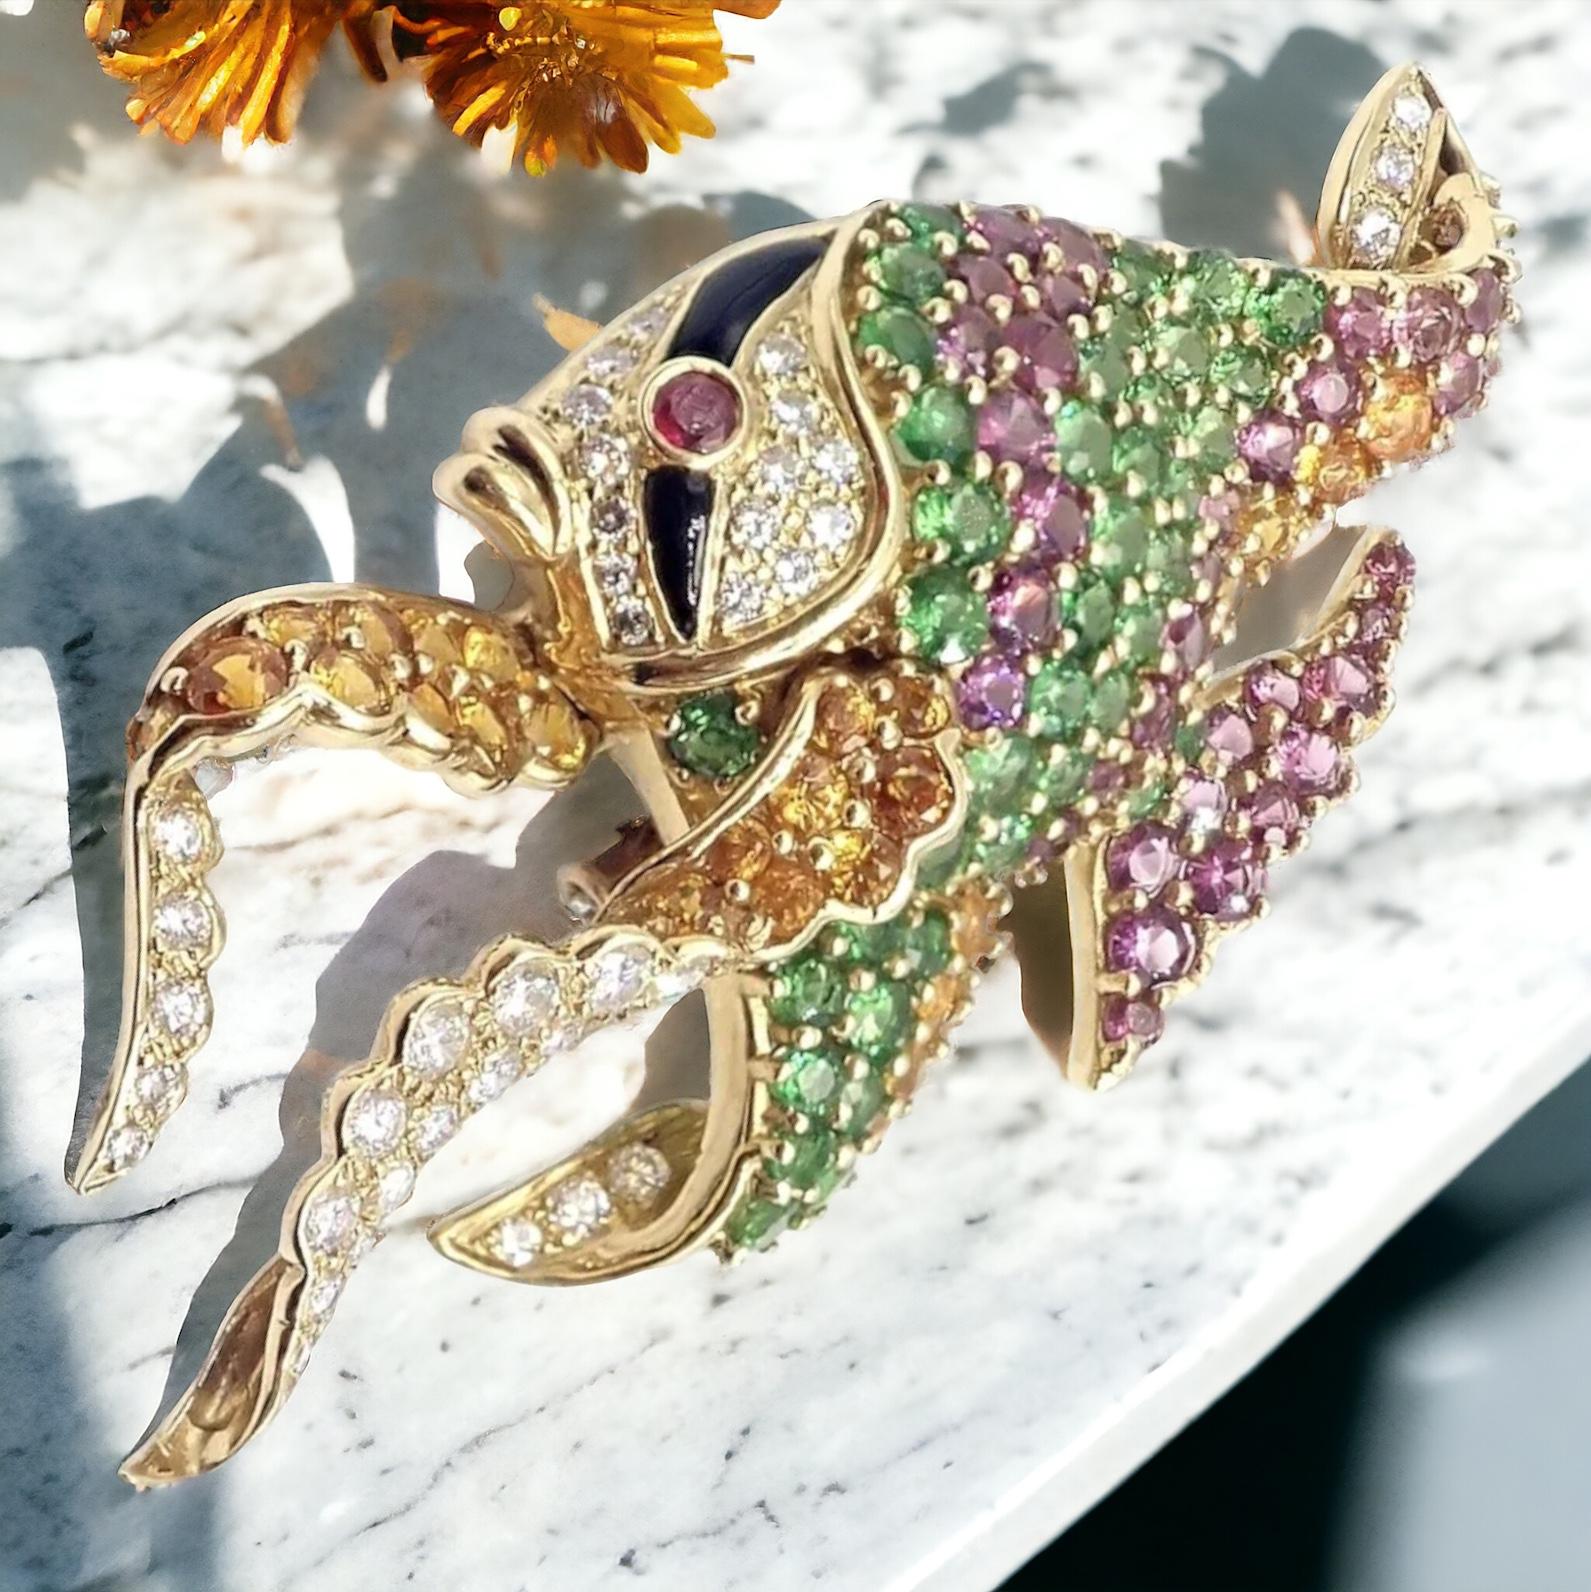 The authentic rare Jean Vitau 18k yellow gold diamond tsavorite yellow sapphire ruby Angel Fish Brooch is a stunning example of the designer's exquisite craftsmanship. The Angel Fish design is intricately detailed with fine lines and curves, while